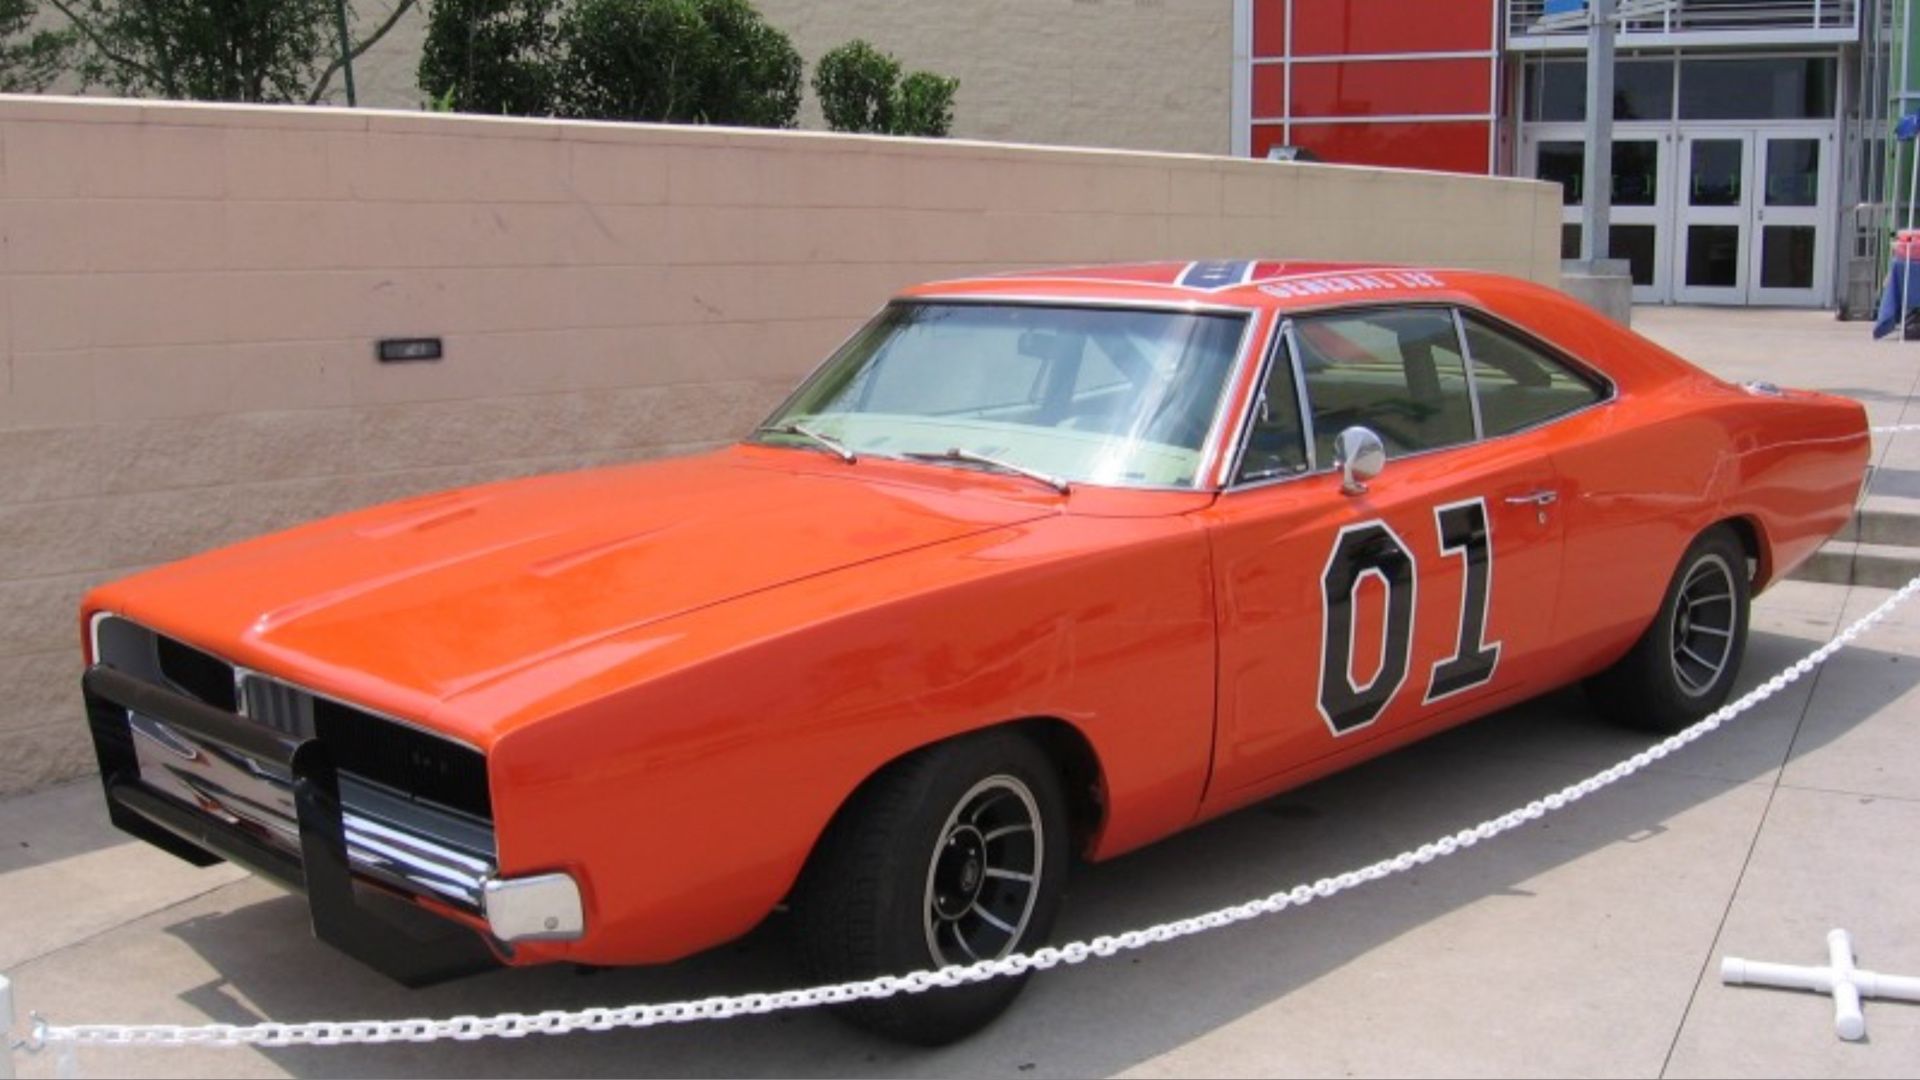 10 Things You Probably Didn't Know About The Dukes Of Hazzard General Lee